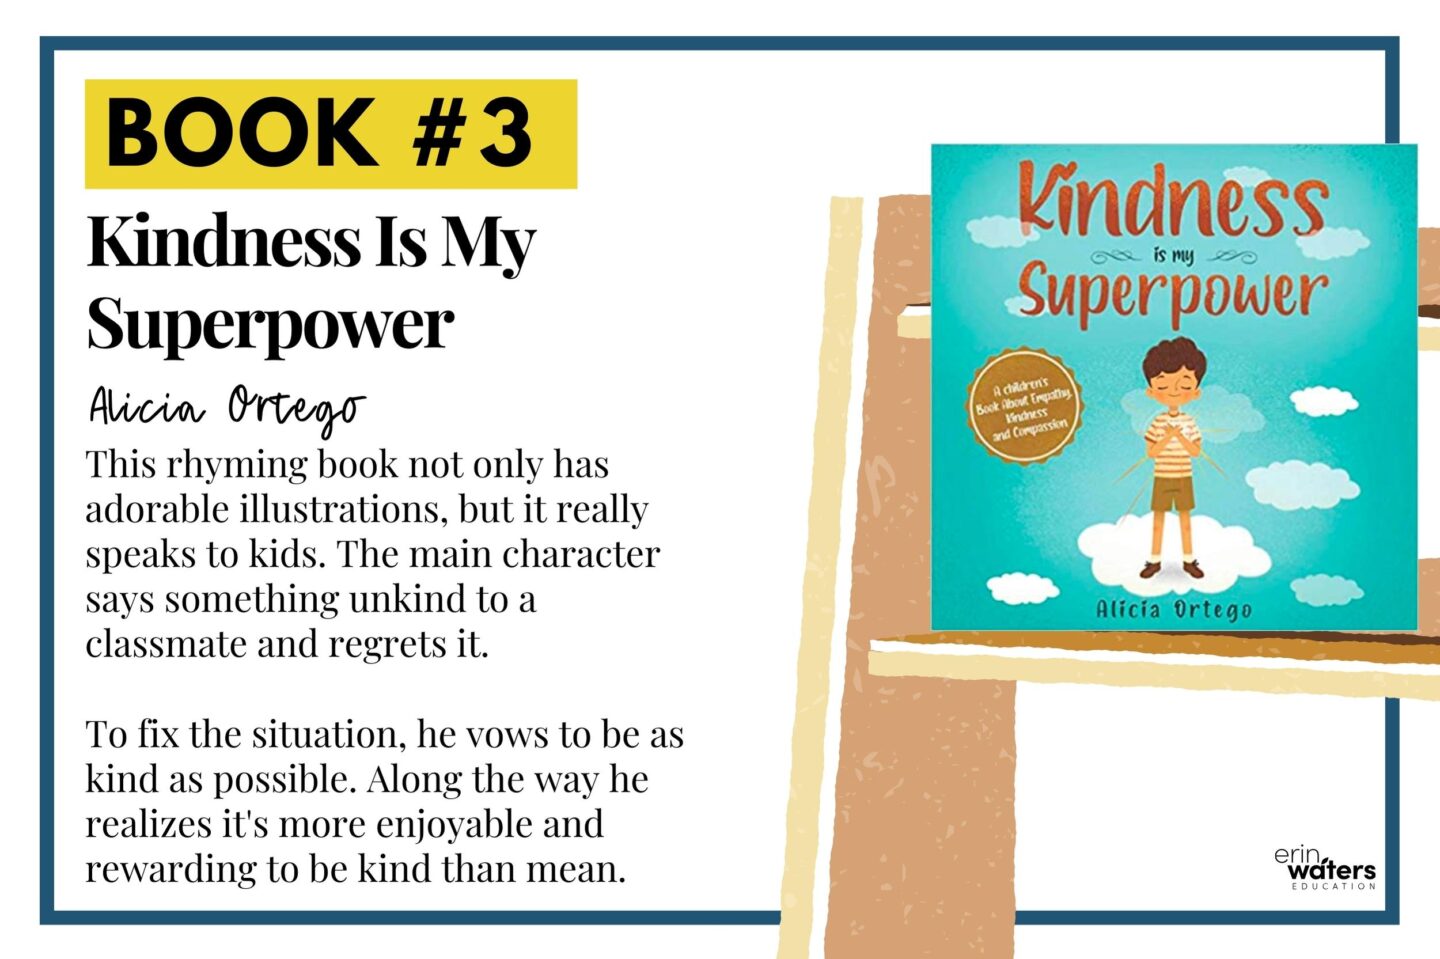 Kindness is My Superpower book on a bookshelf to the right while on the left is a summary of the book.